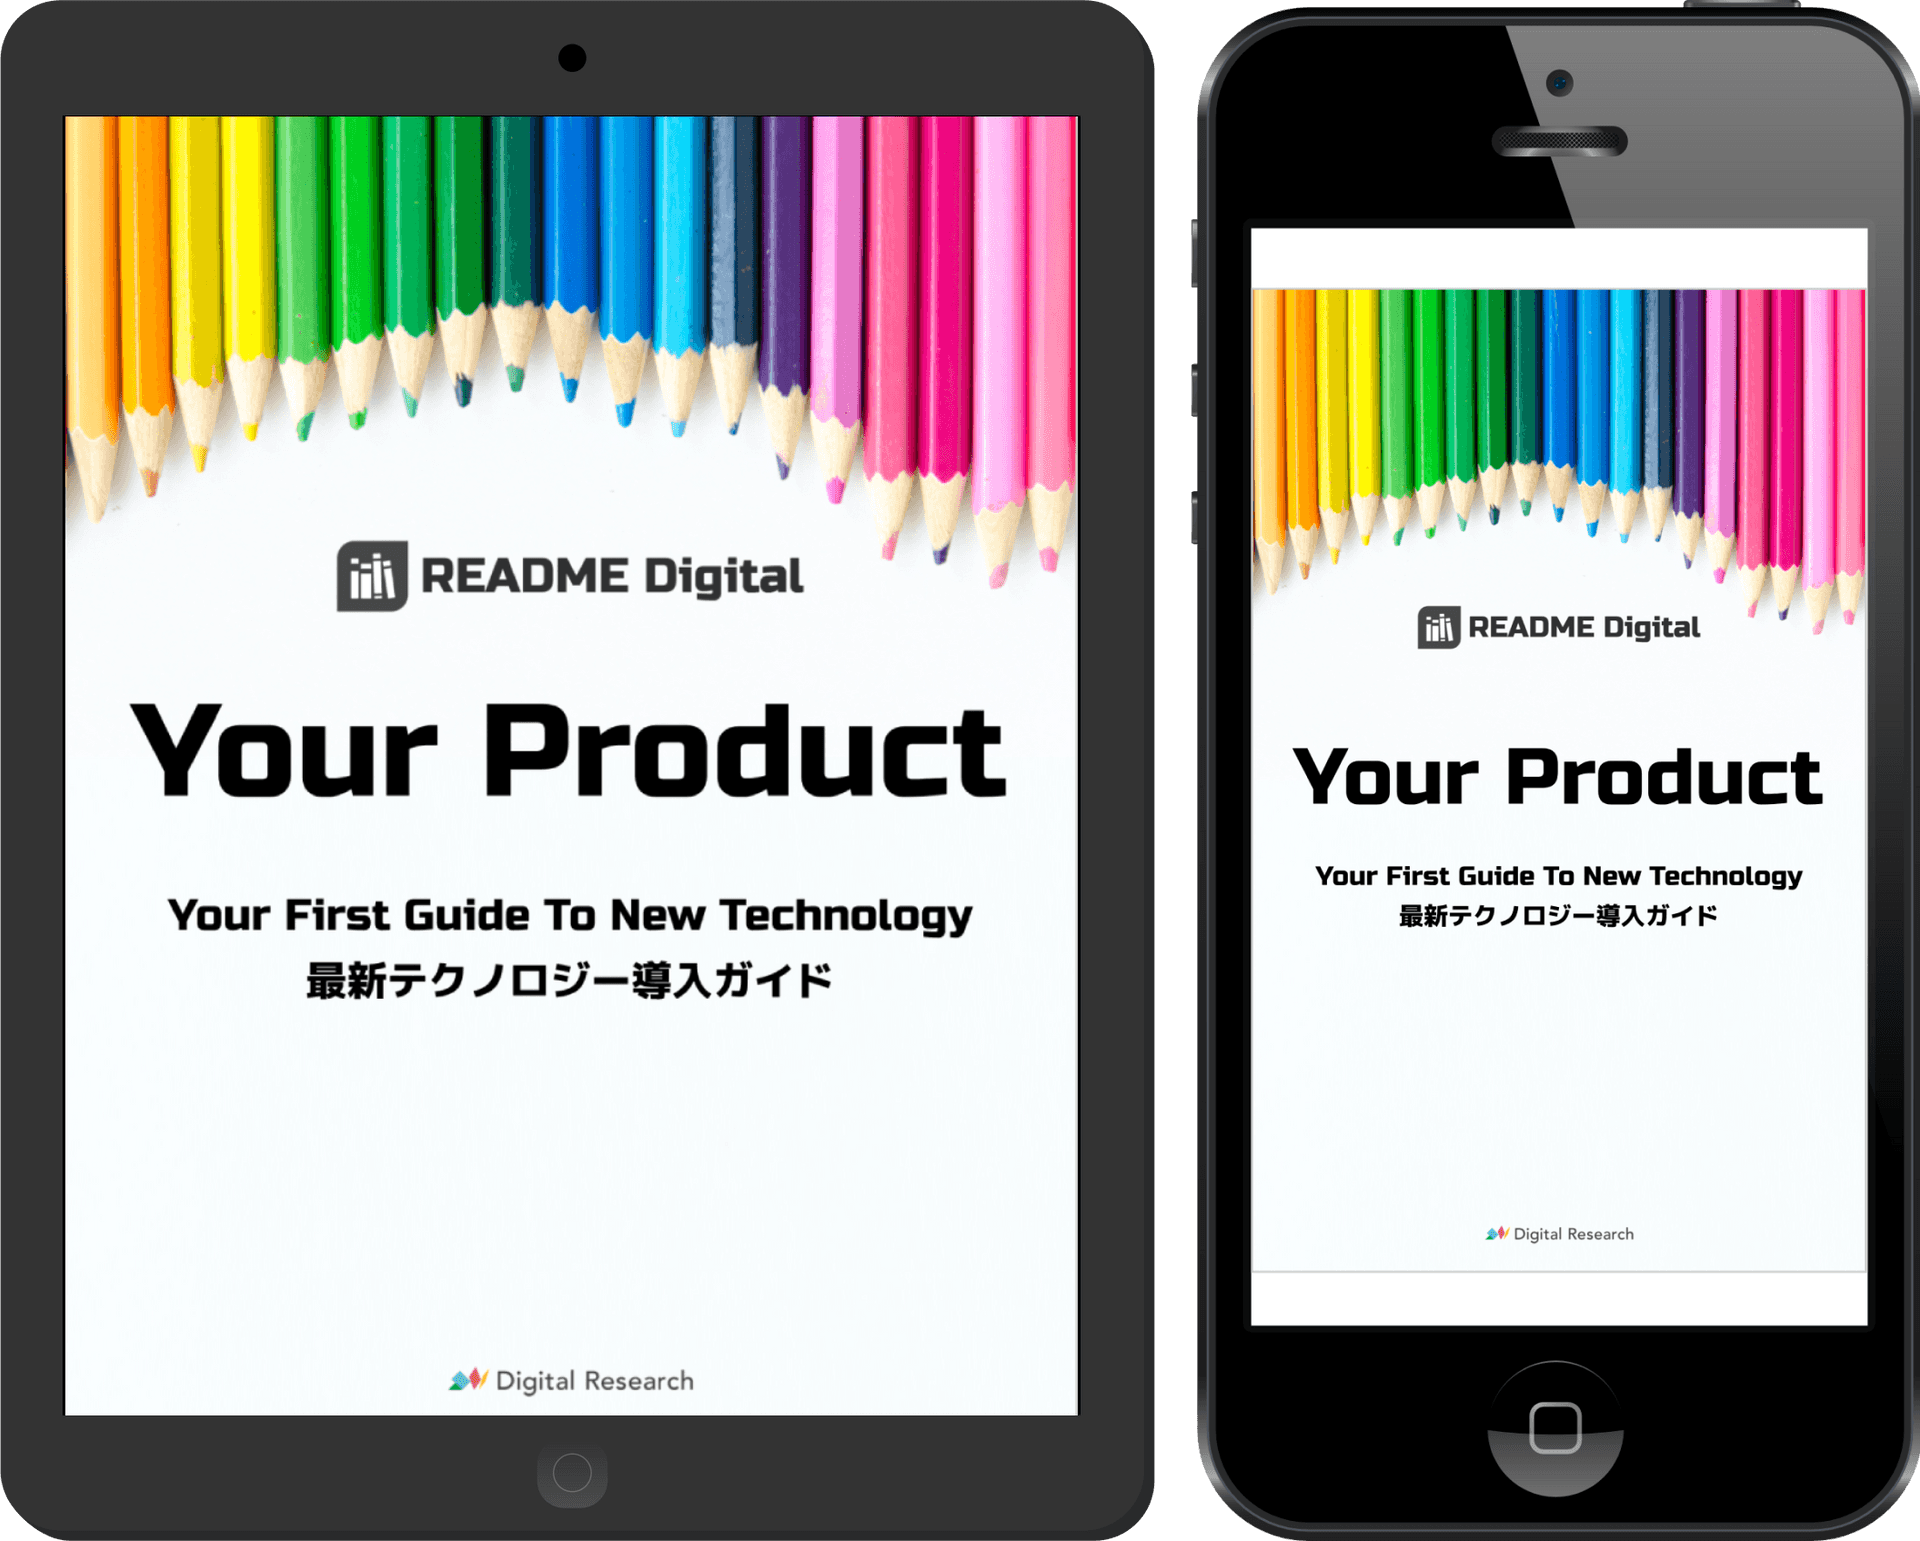 Publish your manual docs as an eBook in Japanese